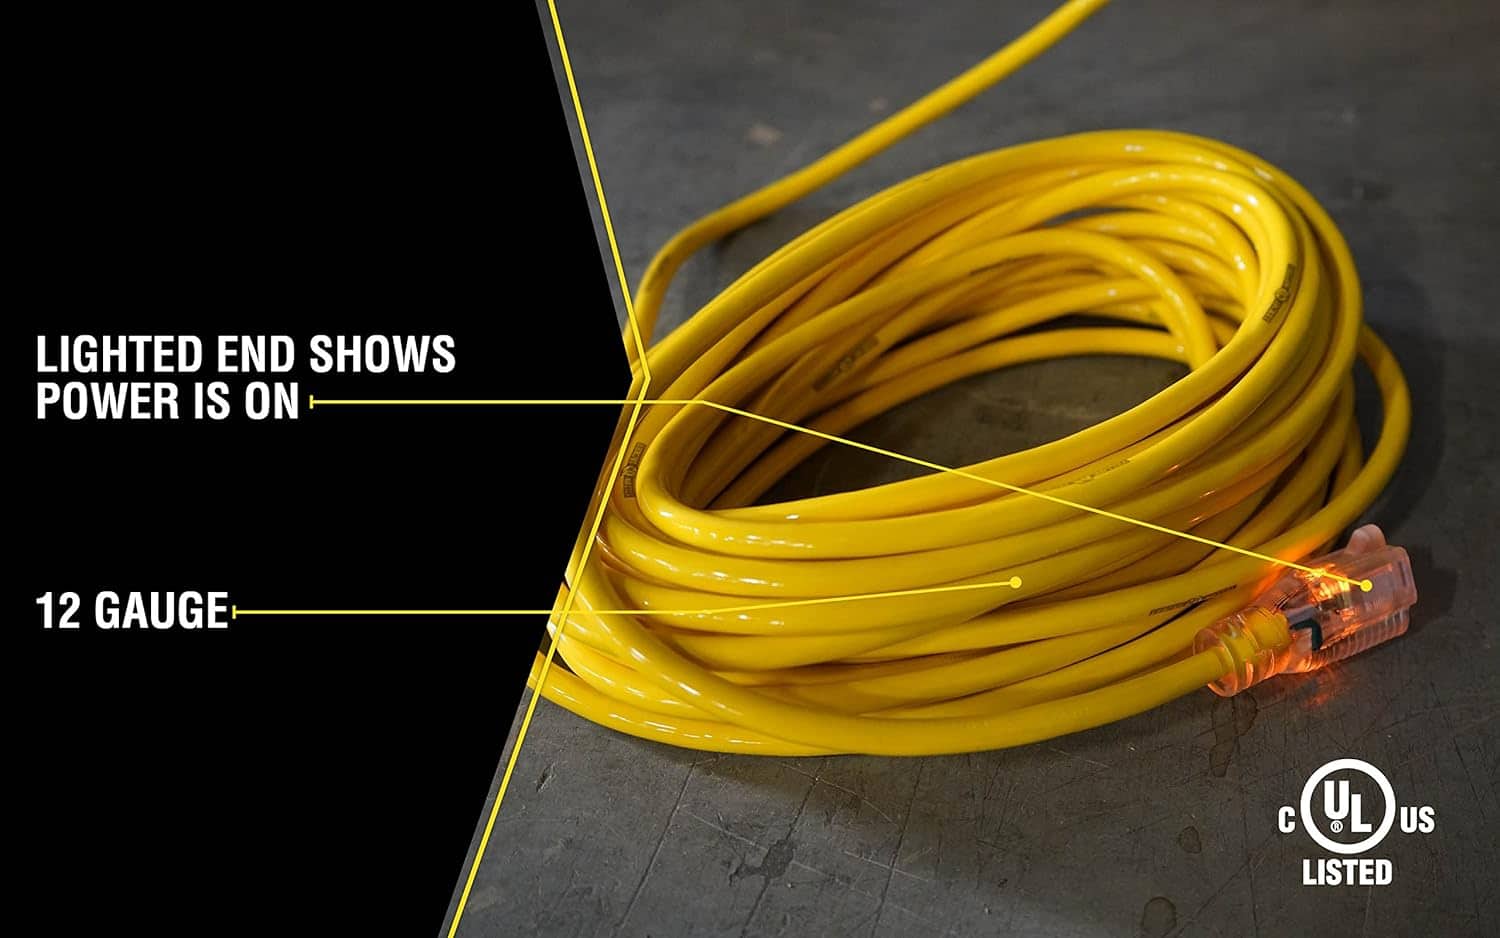 Yellow Jacket 2884 12 3 Heavy-Duty 15-Amp SJTW Contractor Extension Cord with Lighted Ends, Ideal for Heavy Duty Equipment and Tools Durable Clear Molded Plugs High Gloss Yellow Jacket 50-Feet 4